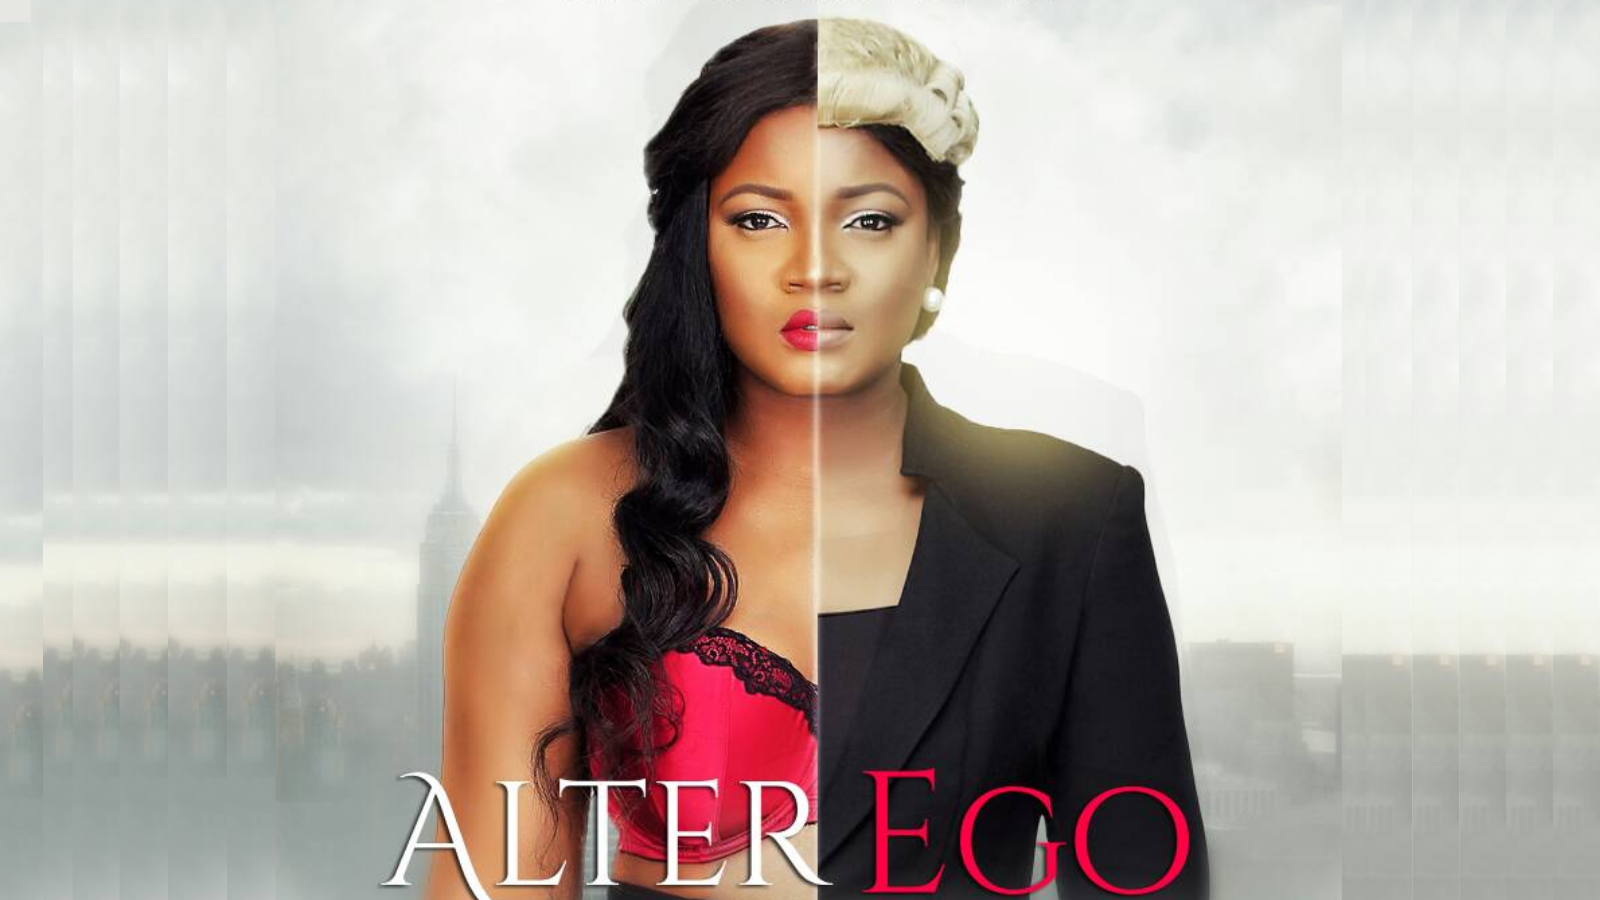 I Watched The Nollywood Movie, Alter Ego, So You Don't Have To